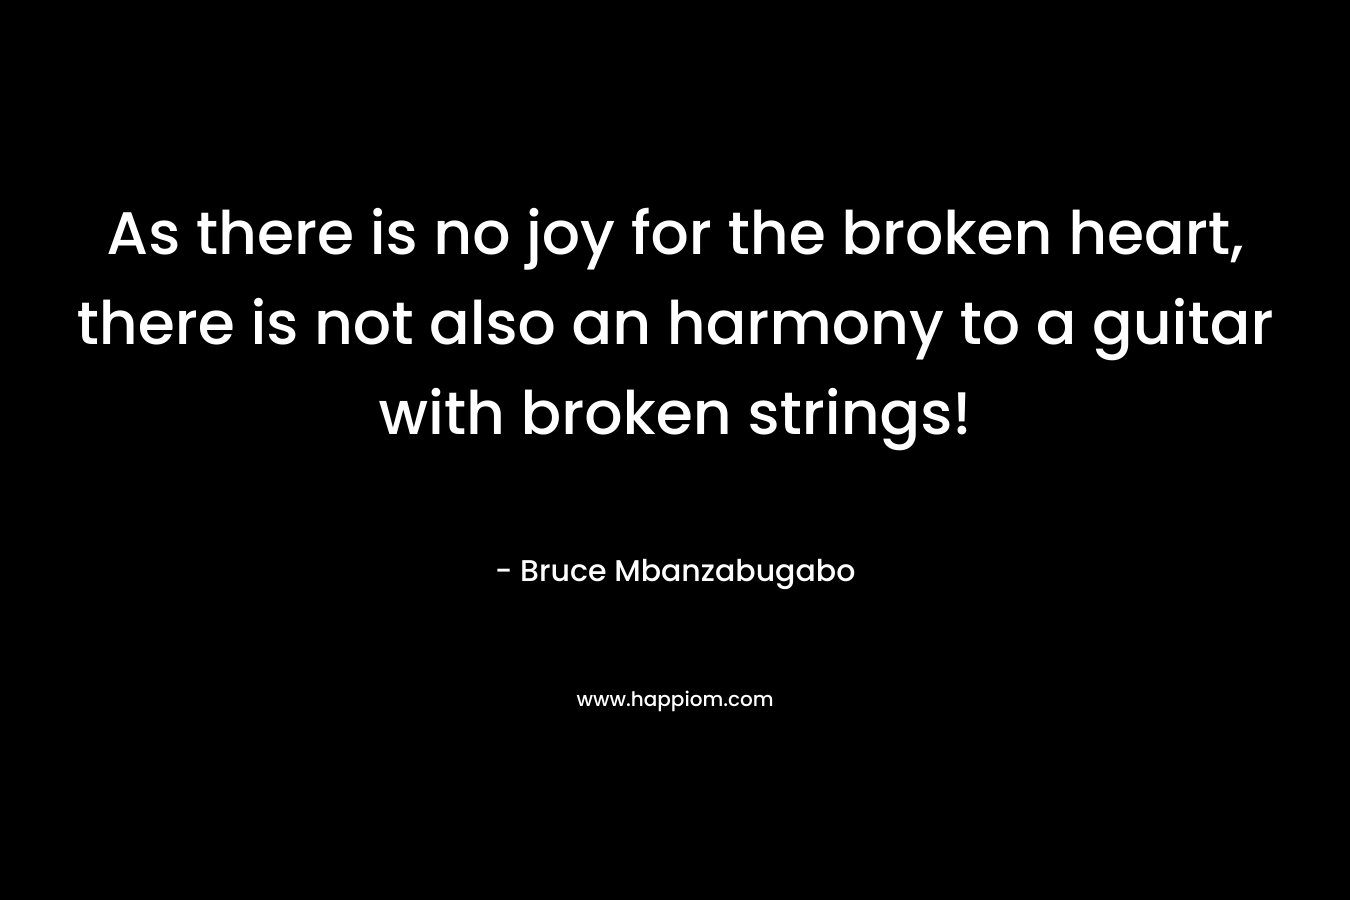 As there is no joy for the broken heart, there is not also an harmony to a guitar with broken strings! – Bruce Mbanzabugabo